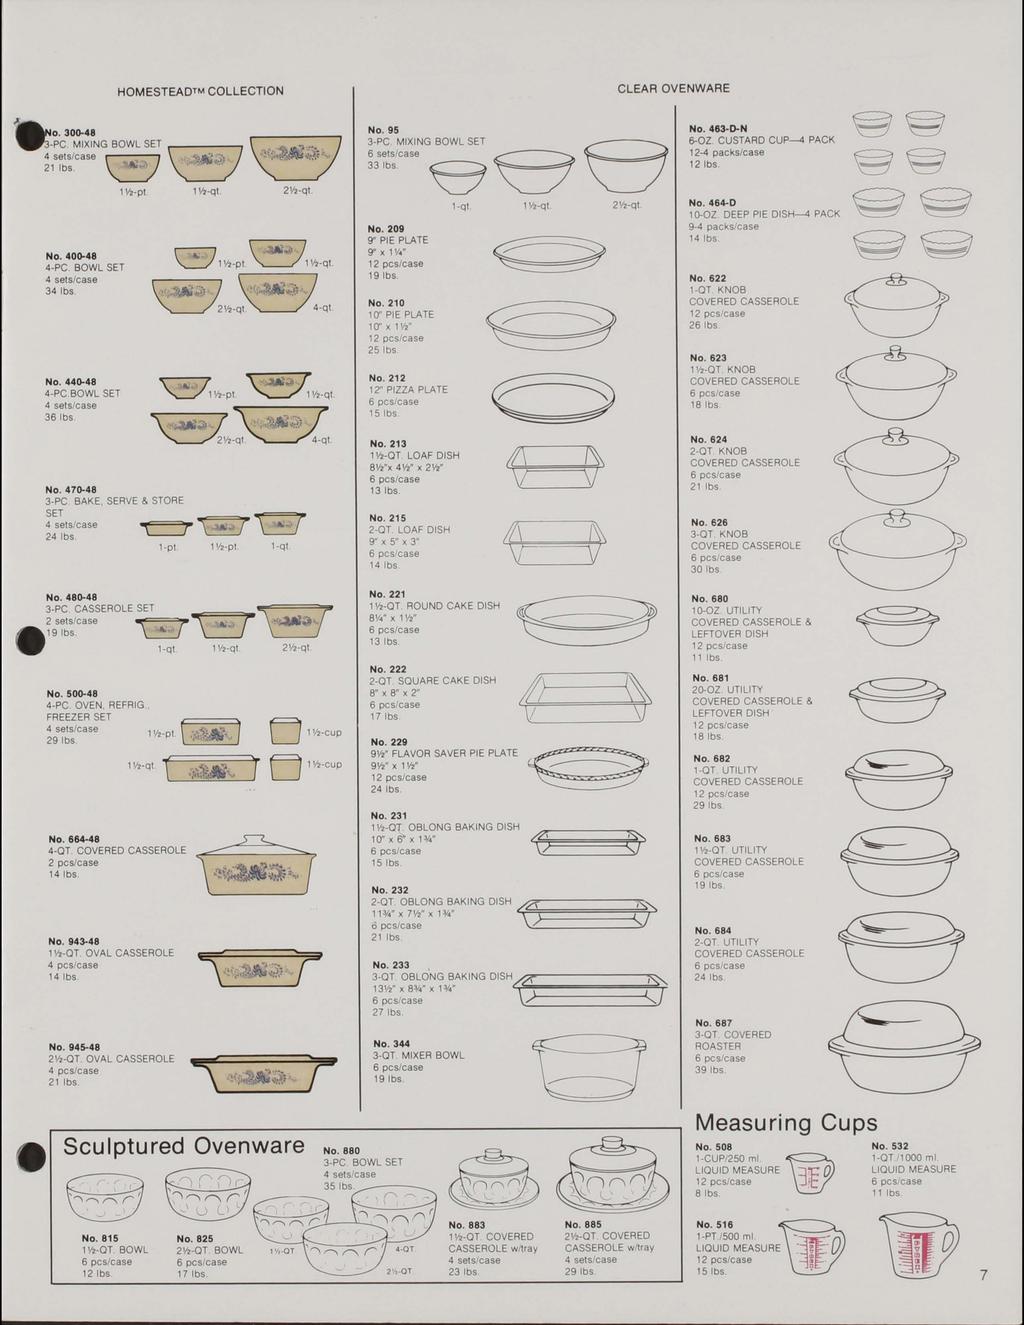 HOMESTEAD COLLECTION ~o. 300-48 w-:i- -PC MIXING BOWL ~ ;,s~~~/case G No. 400-48 4-PC. BOWL No. 440-48 3 \5 ~ 1 V,-pl 1V,-q1 211,-ql r::::9 111,-pt ~ 111,-qt ~~ ~ V,-~ -qt \._,9; V,-pt ~ V,-qt No.